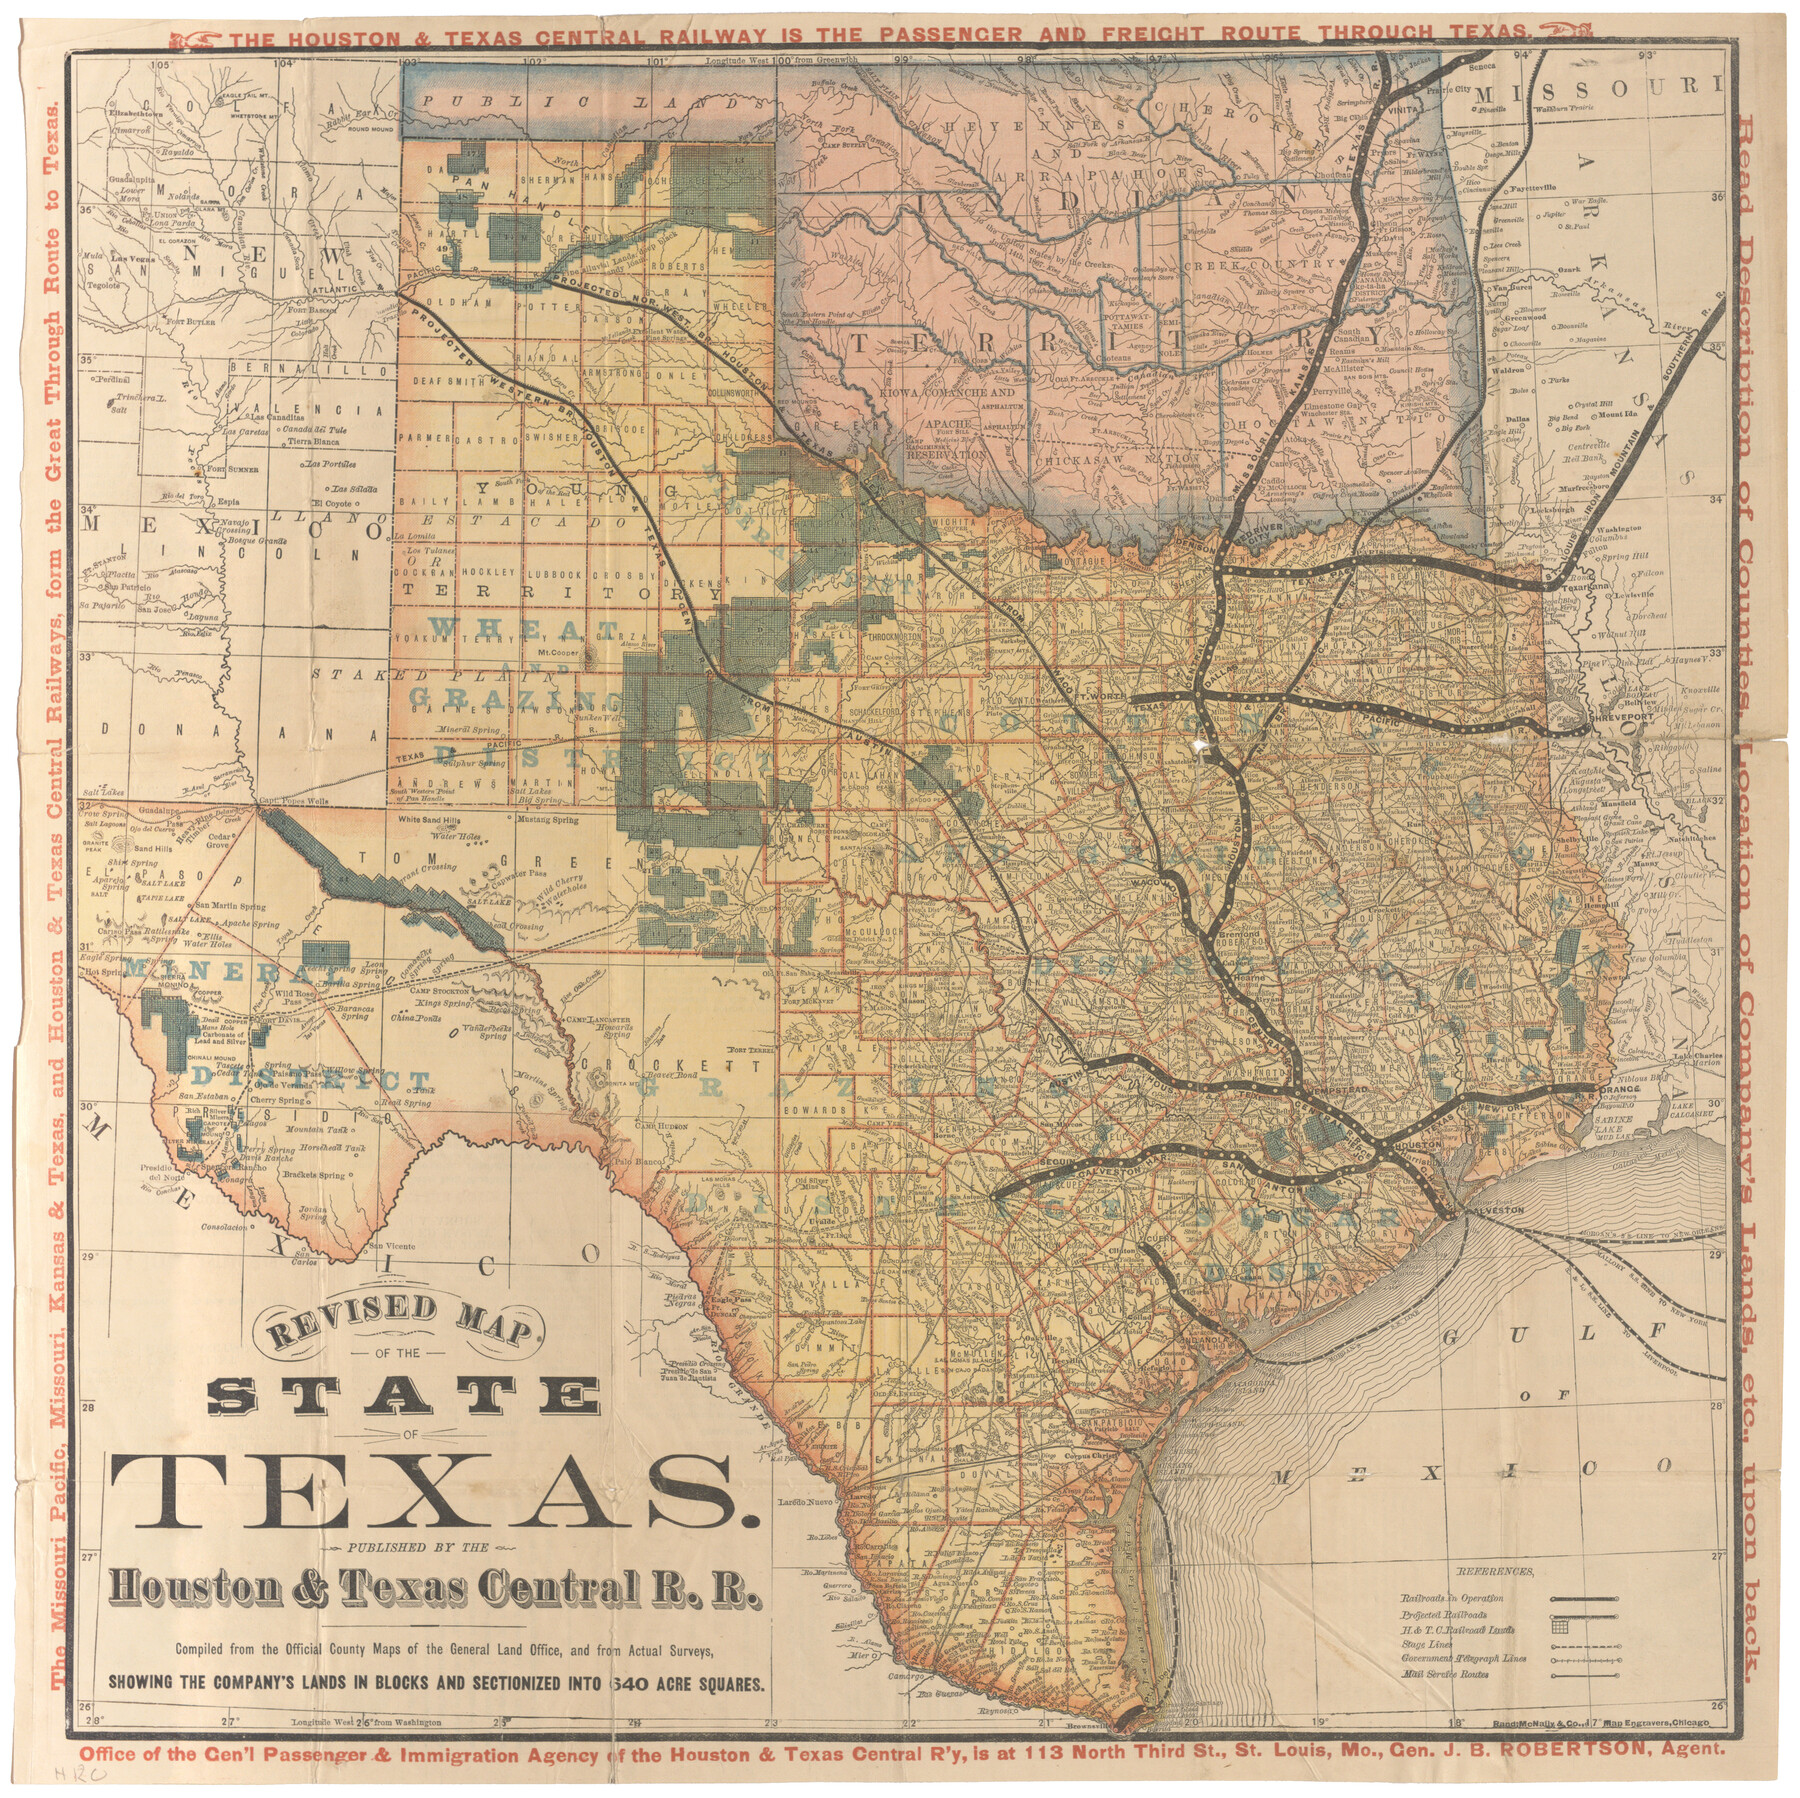 Revised map of the State of Texas